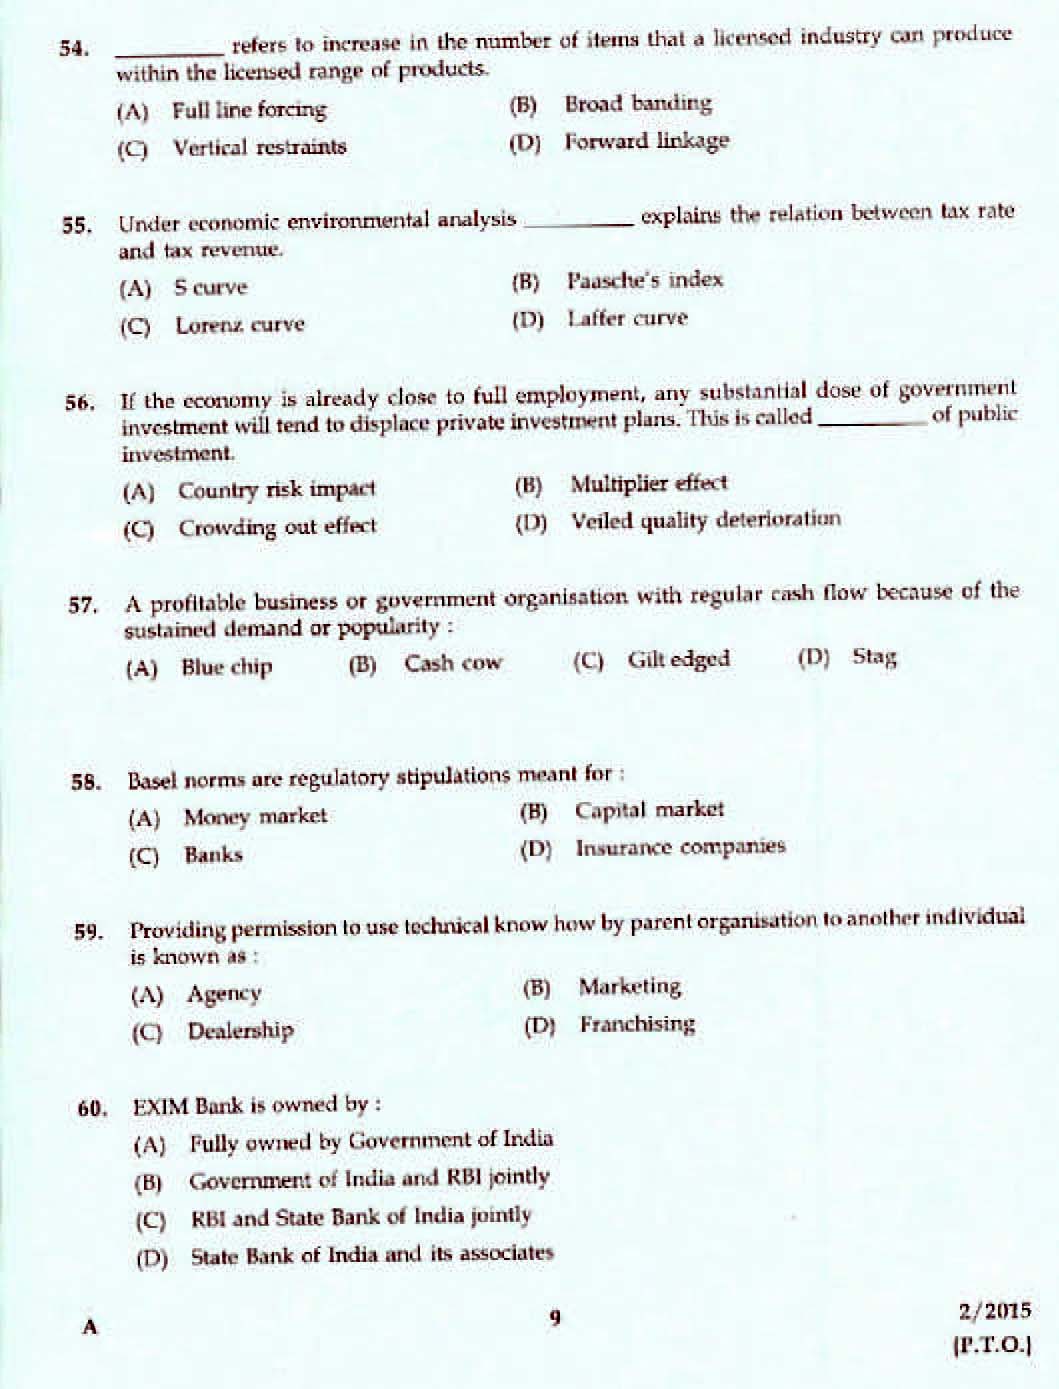 Kerala PSC Accounts Officer OMR Exam 2015 Question Paper Code 22015 7